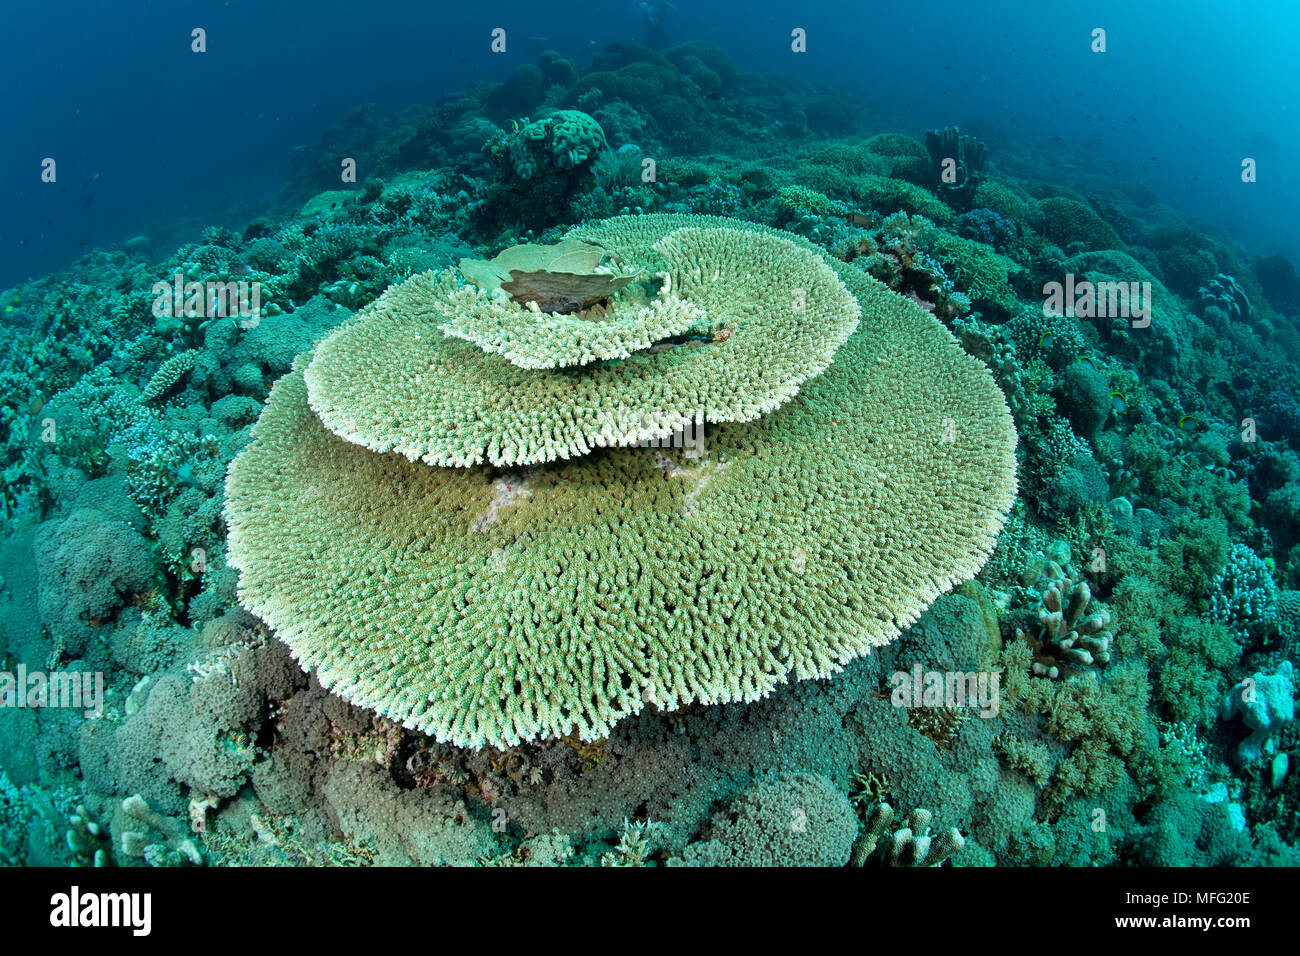 Reef covered with hard coral, Acropora hyacinthus, Tubbataha Natural Park, Natural World Heritage Site,  Sulu Sea, Cagayancillo, Palawan, Philippines Stock Photo